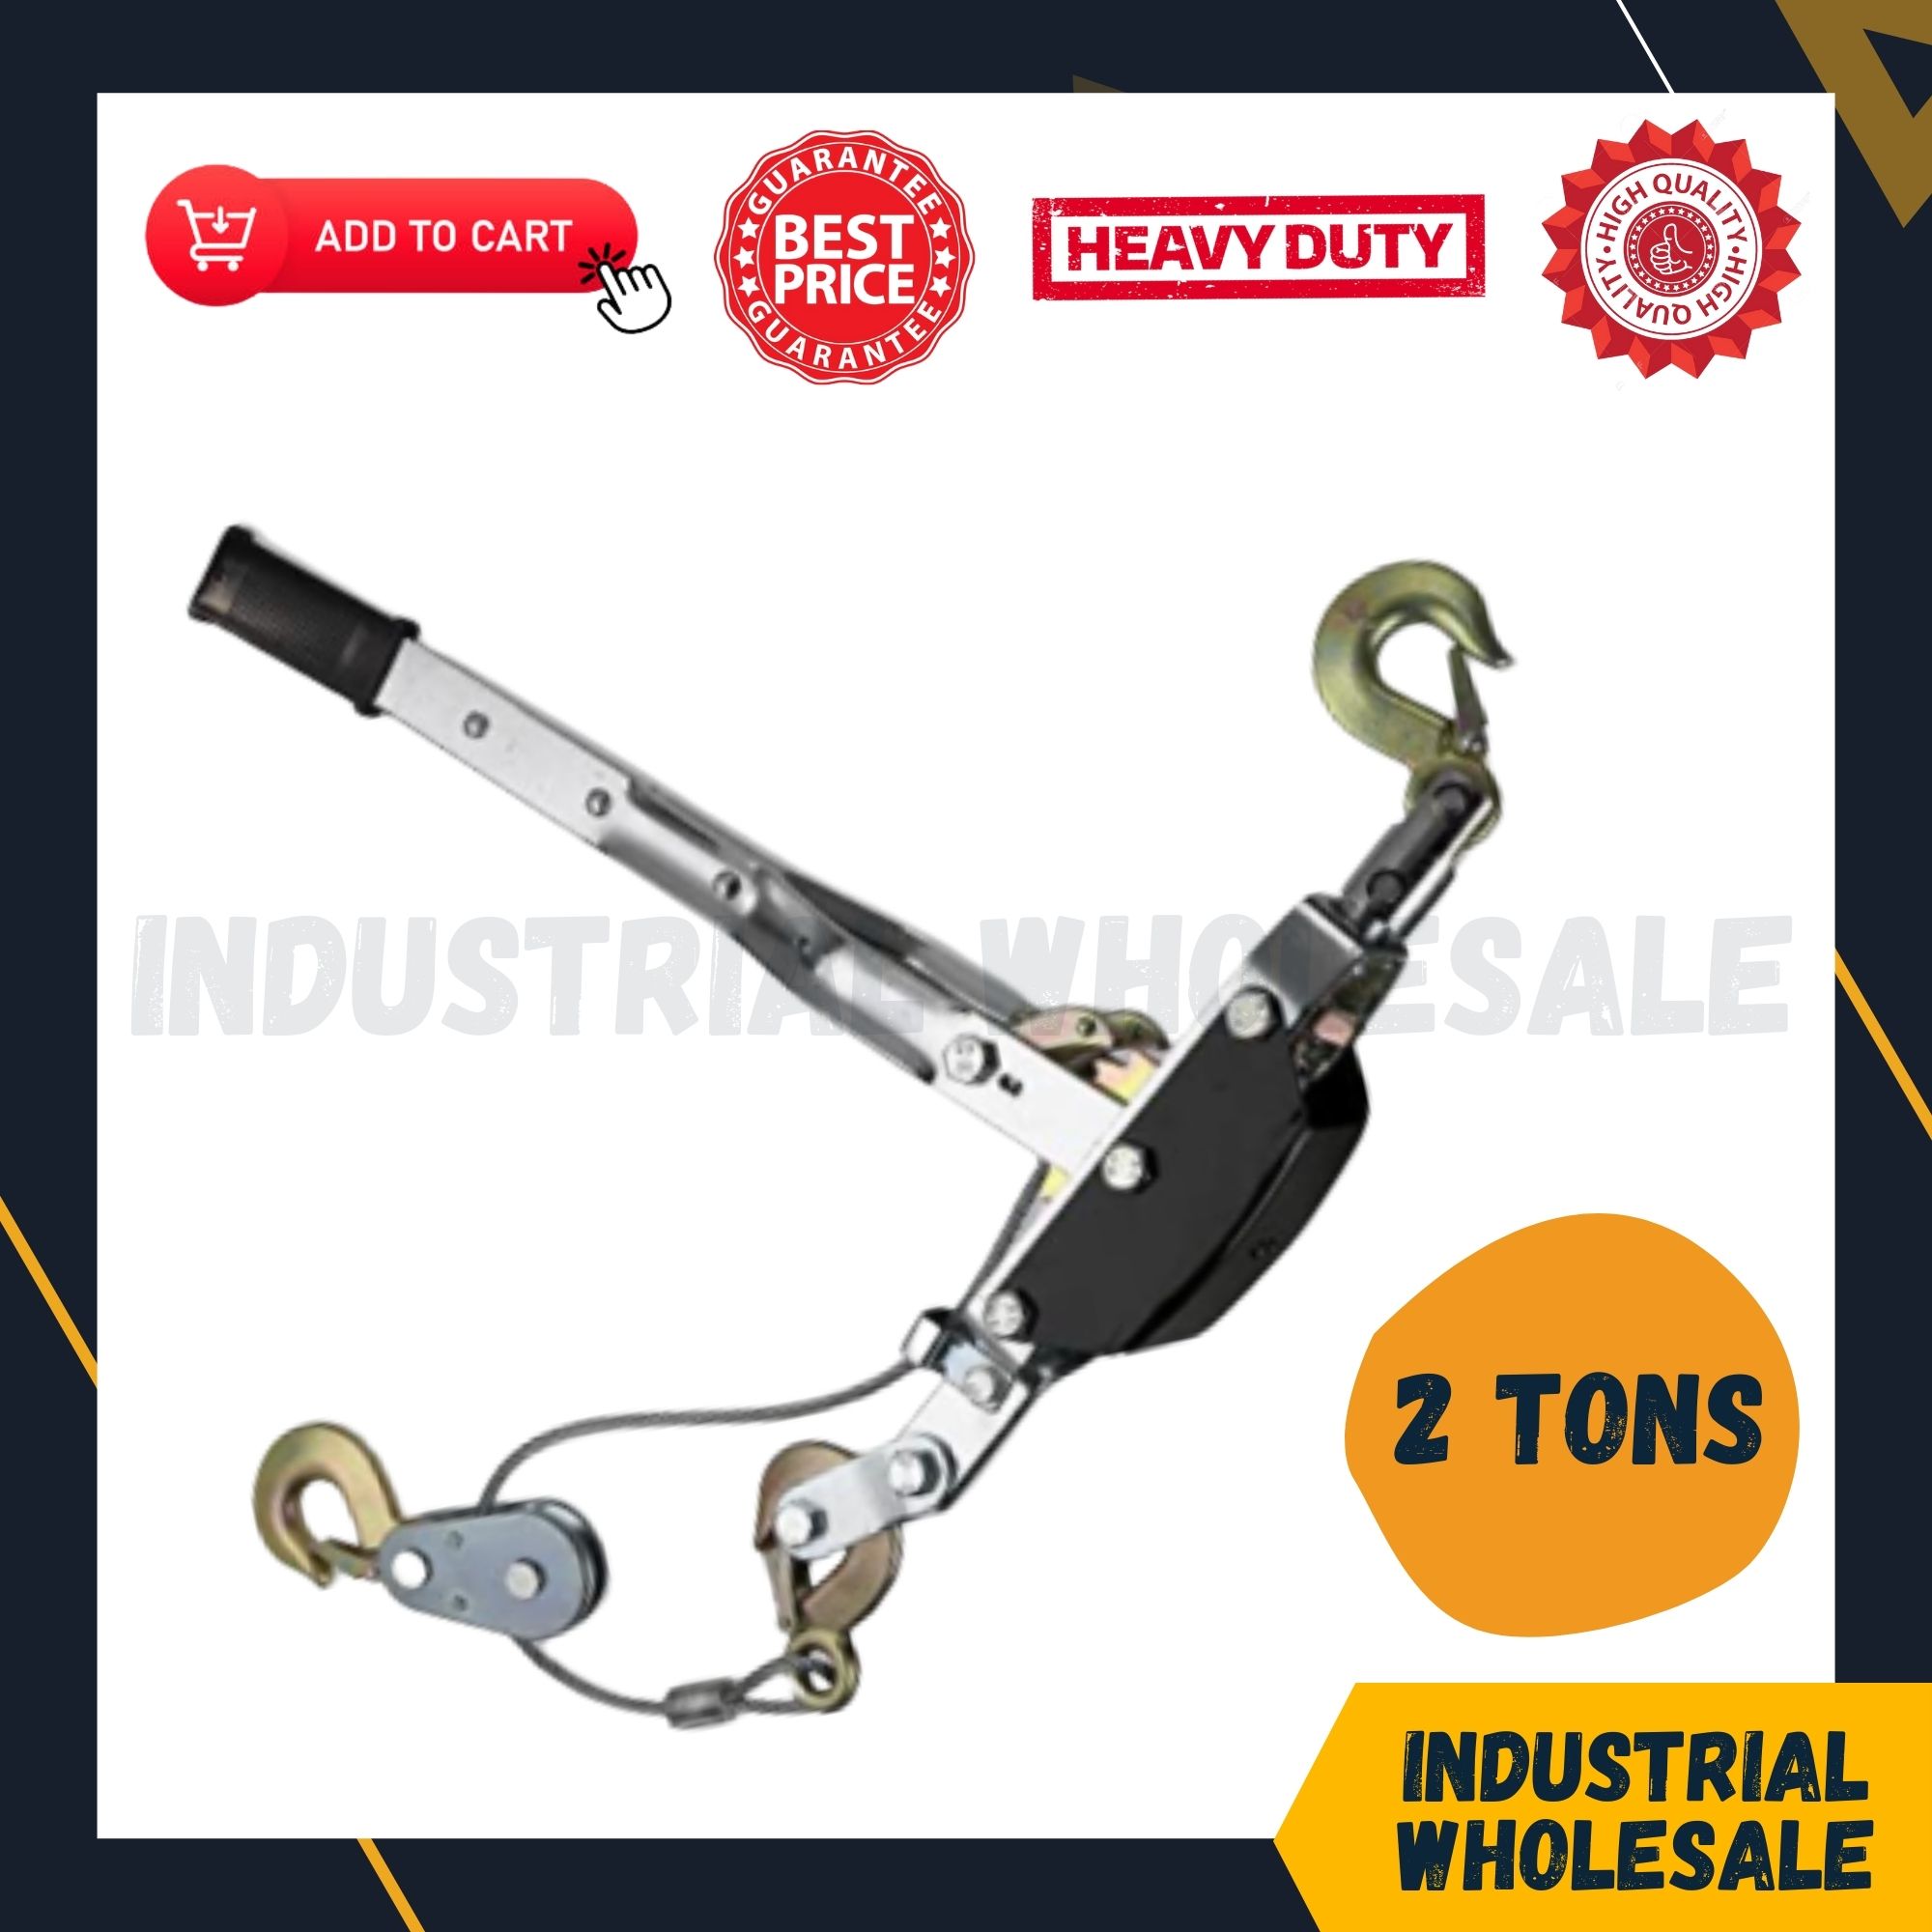 19.7ft.L Ironton 1-Ton Rope Puller with 3 Hooks 